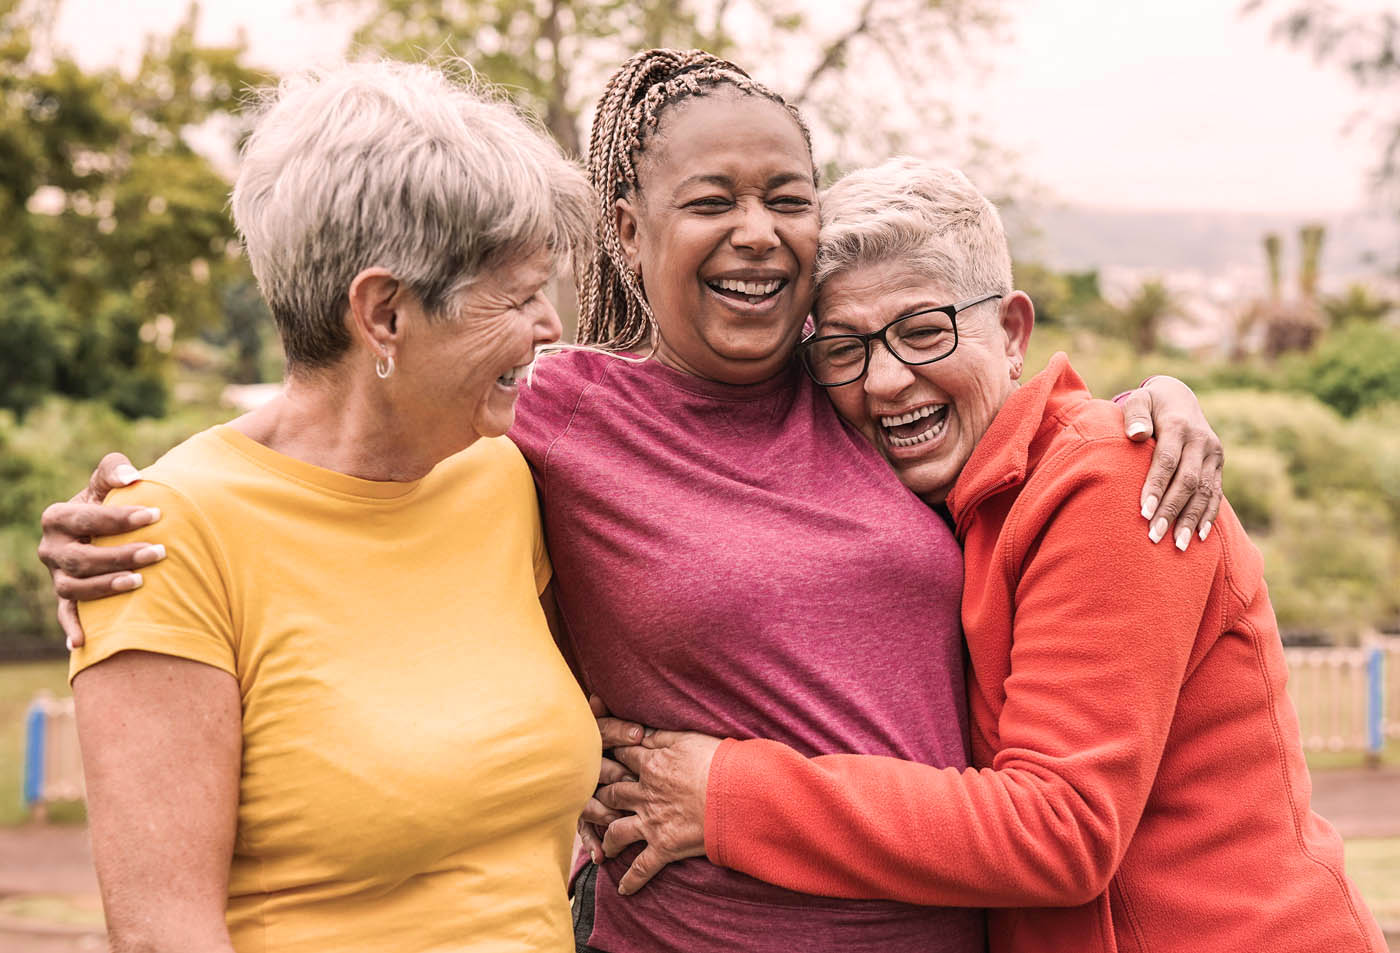 A group of elderly women laughing and hugging each other - discover Boulder multiple sclerosis pain treatment today.